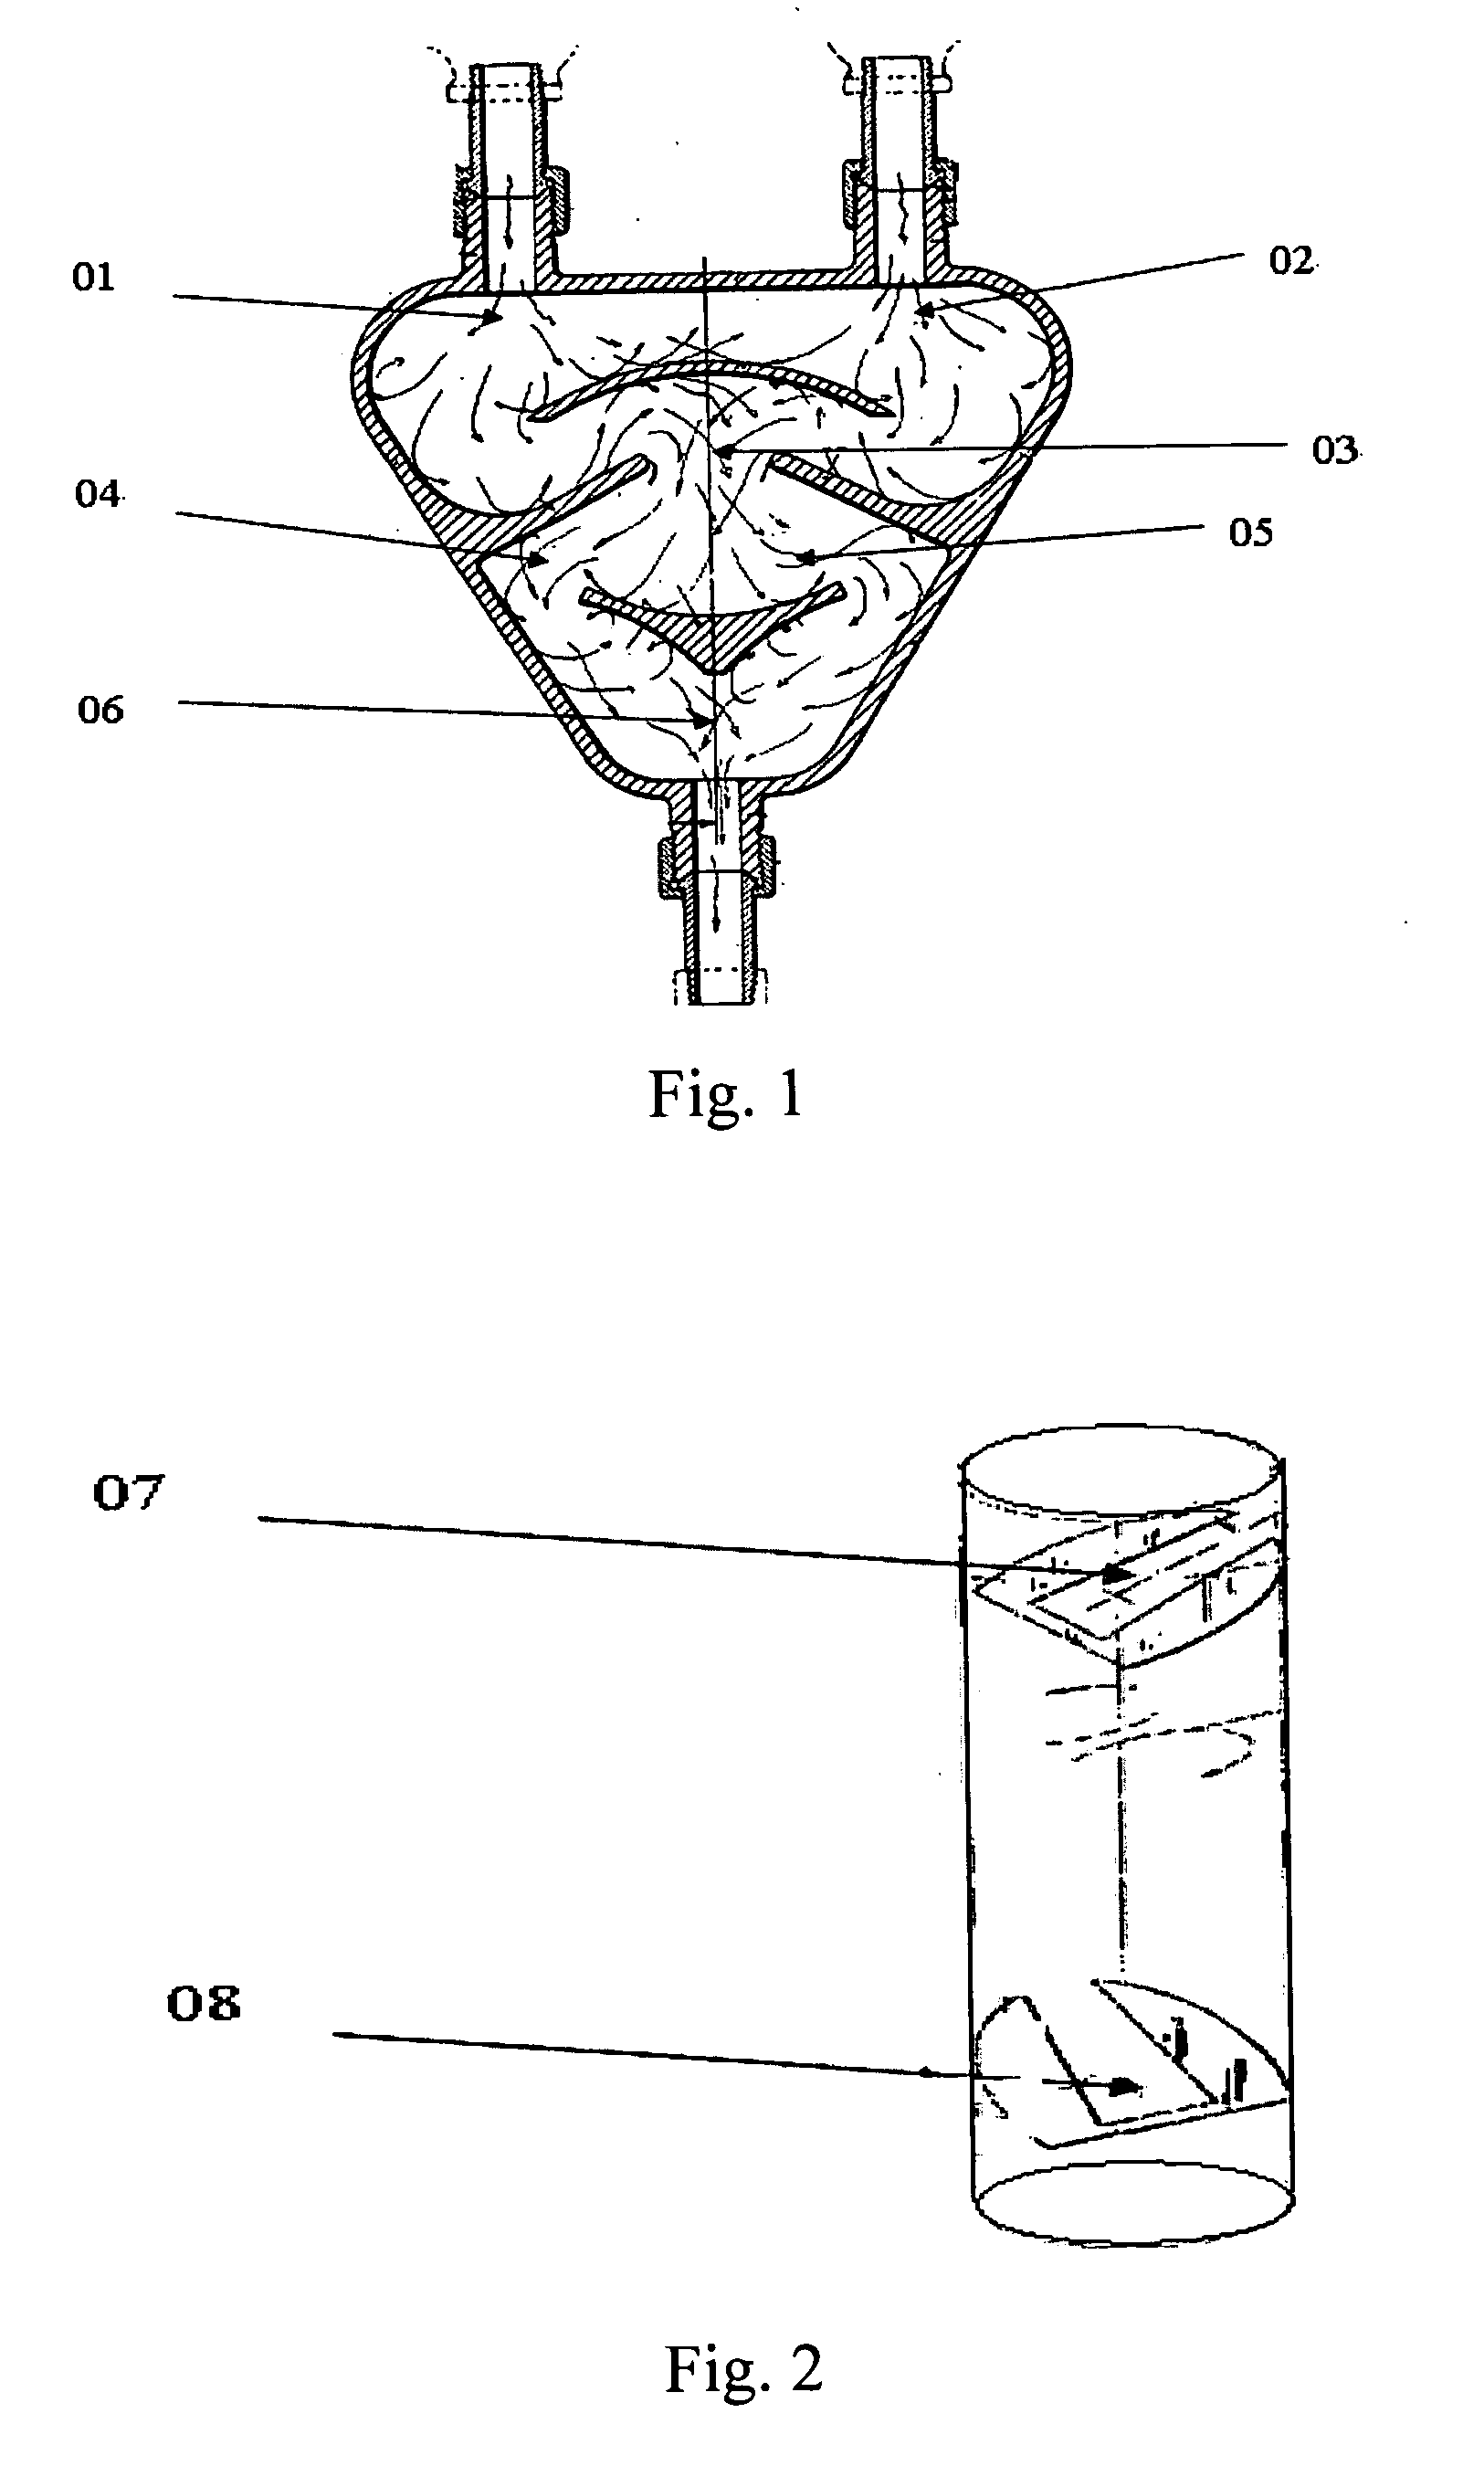 Fluidic mixer of serpentine channel incorporated with staggered sudden-expansion and convergent cross sections